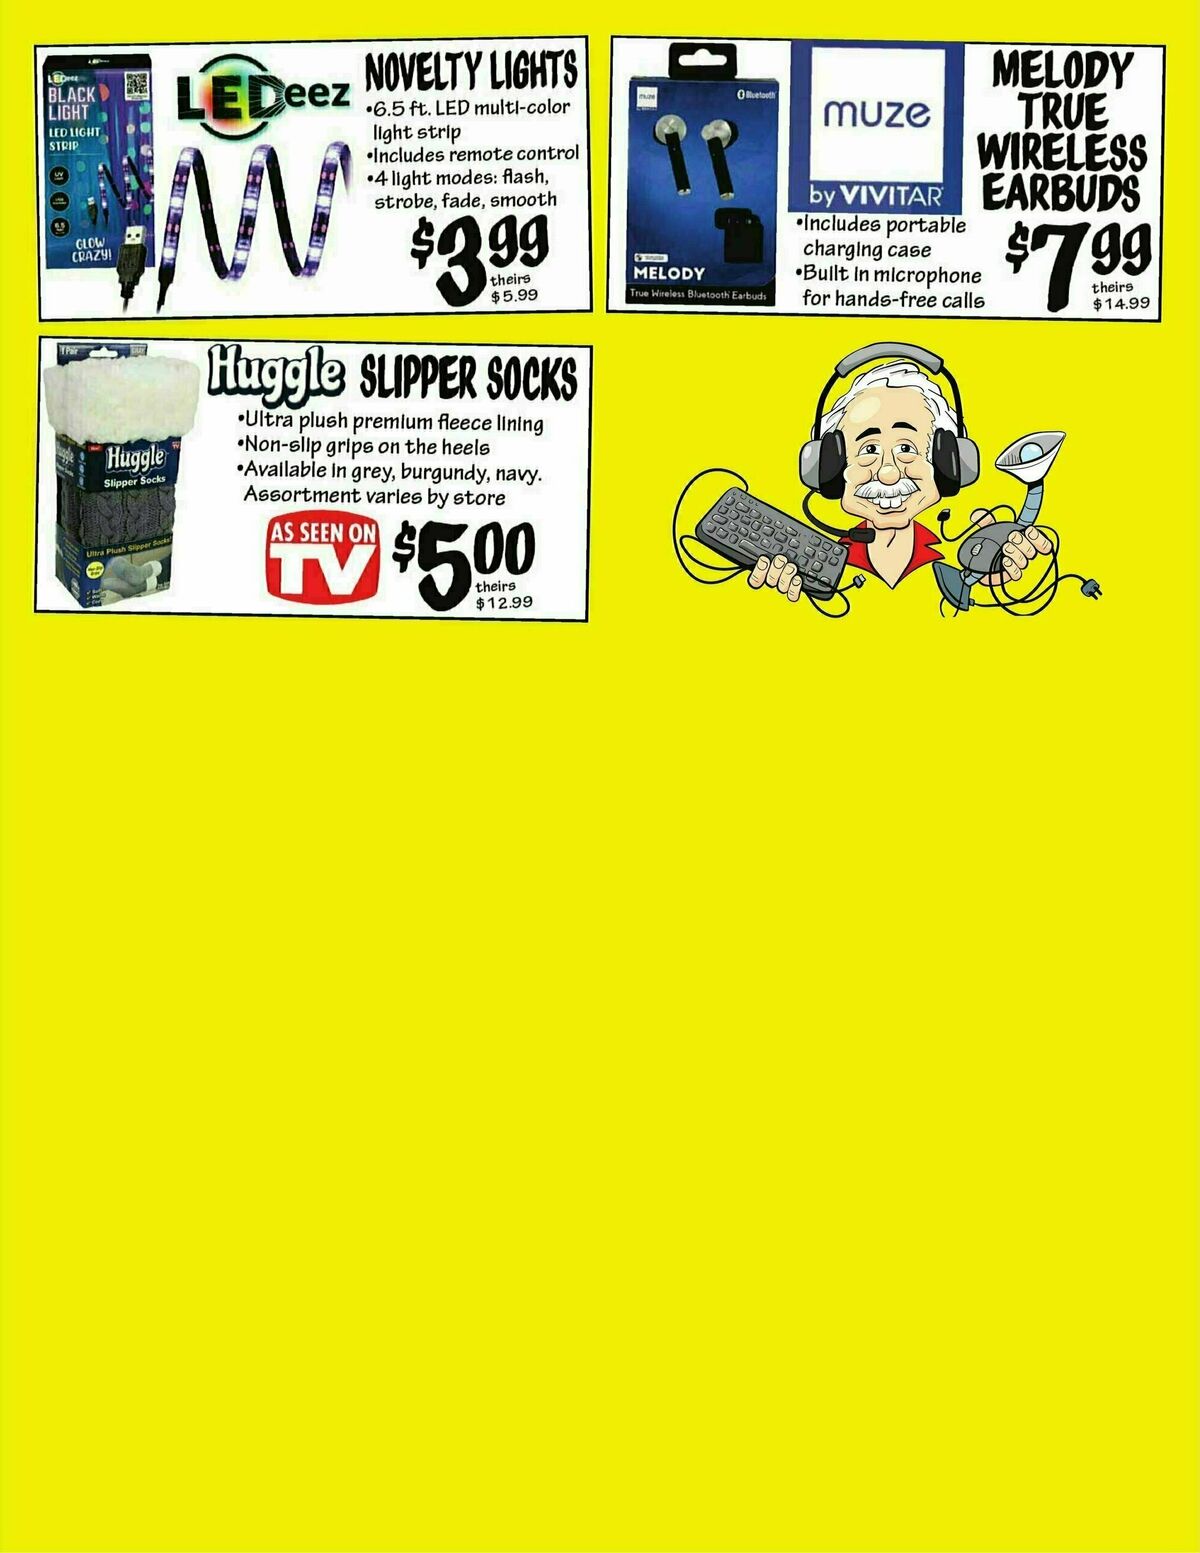 Ollie's Bargain Outlet Weekly Ad from August 2